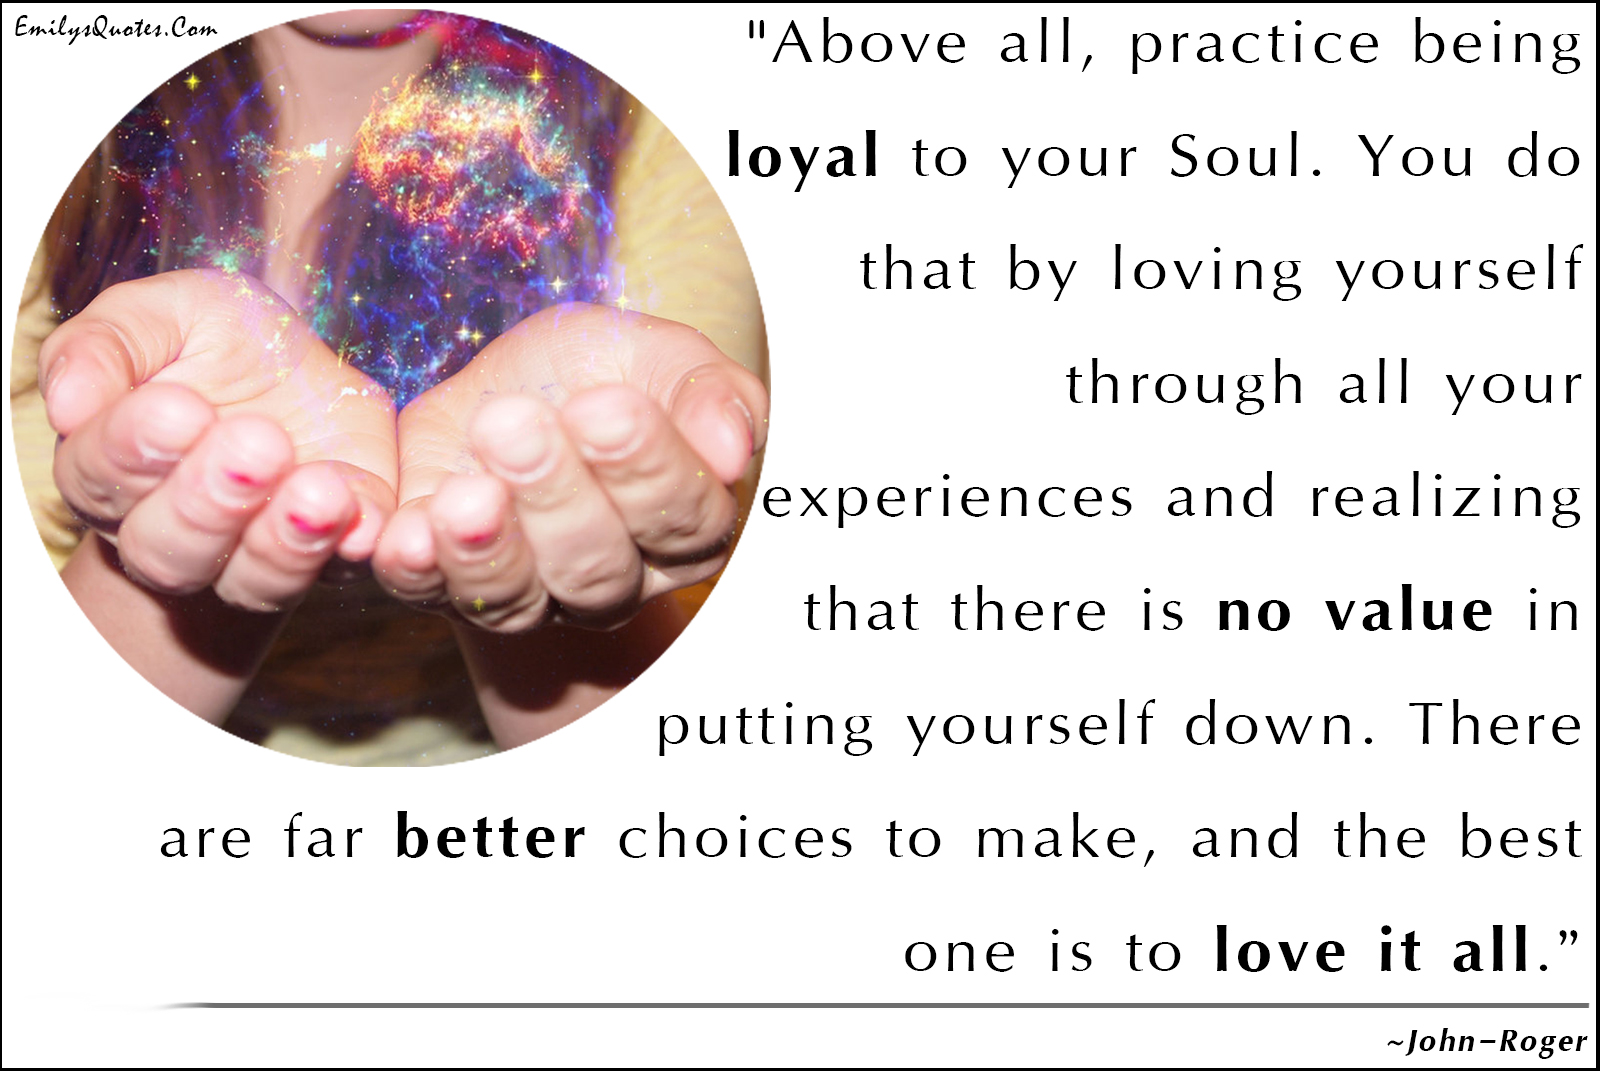 Above all, practice being loyal to your Soul. You do that by loving yourself through all your experiences and realizing that there is no value in putting yourself down. There are far better choices to make, and the best one is to love it all